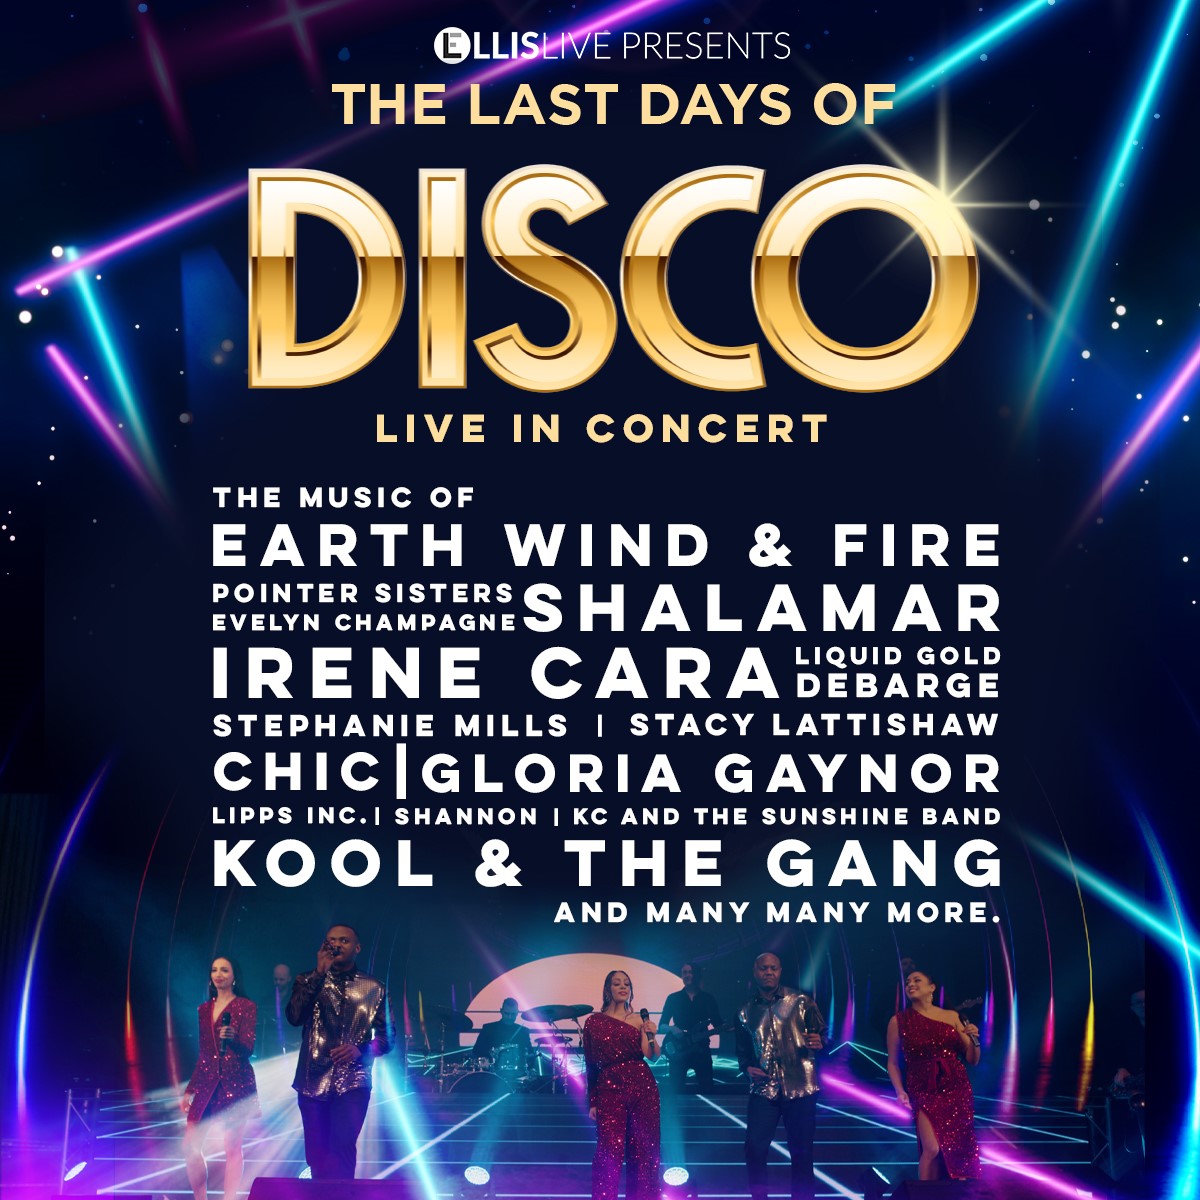 THE LAST DAYS OF DISCO with after show party & DJ on May 24, 19:30@Standard capacity - Pick a seat, Buy tickets and Get information on Sutton Coldfield Town Hall 